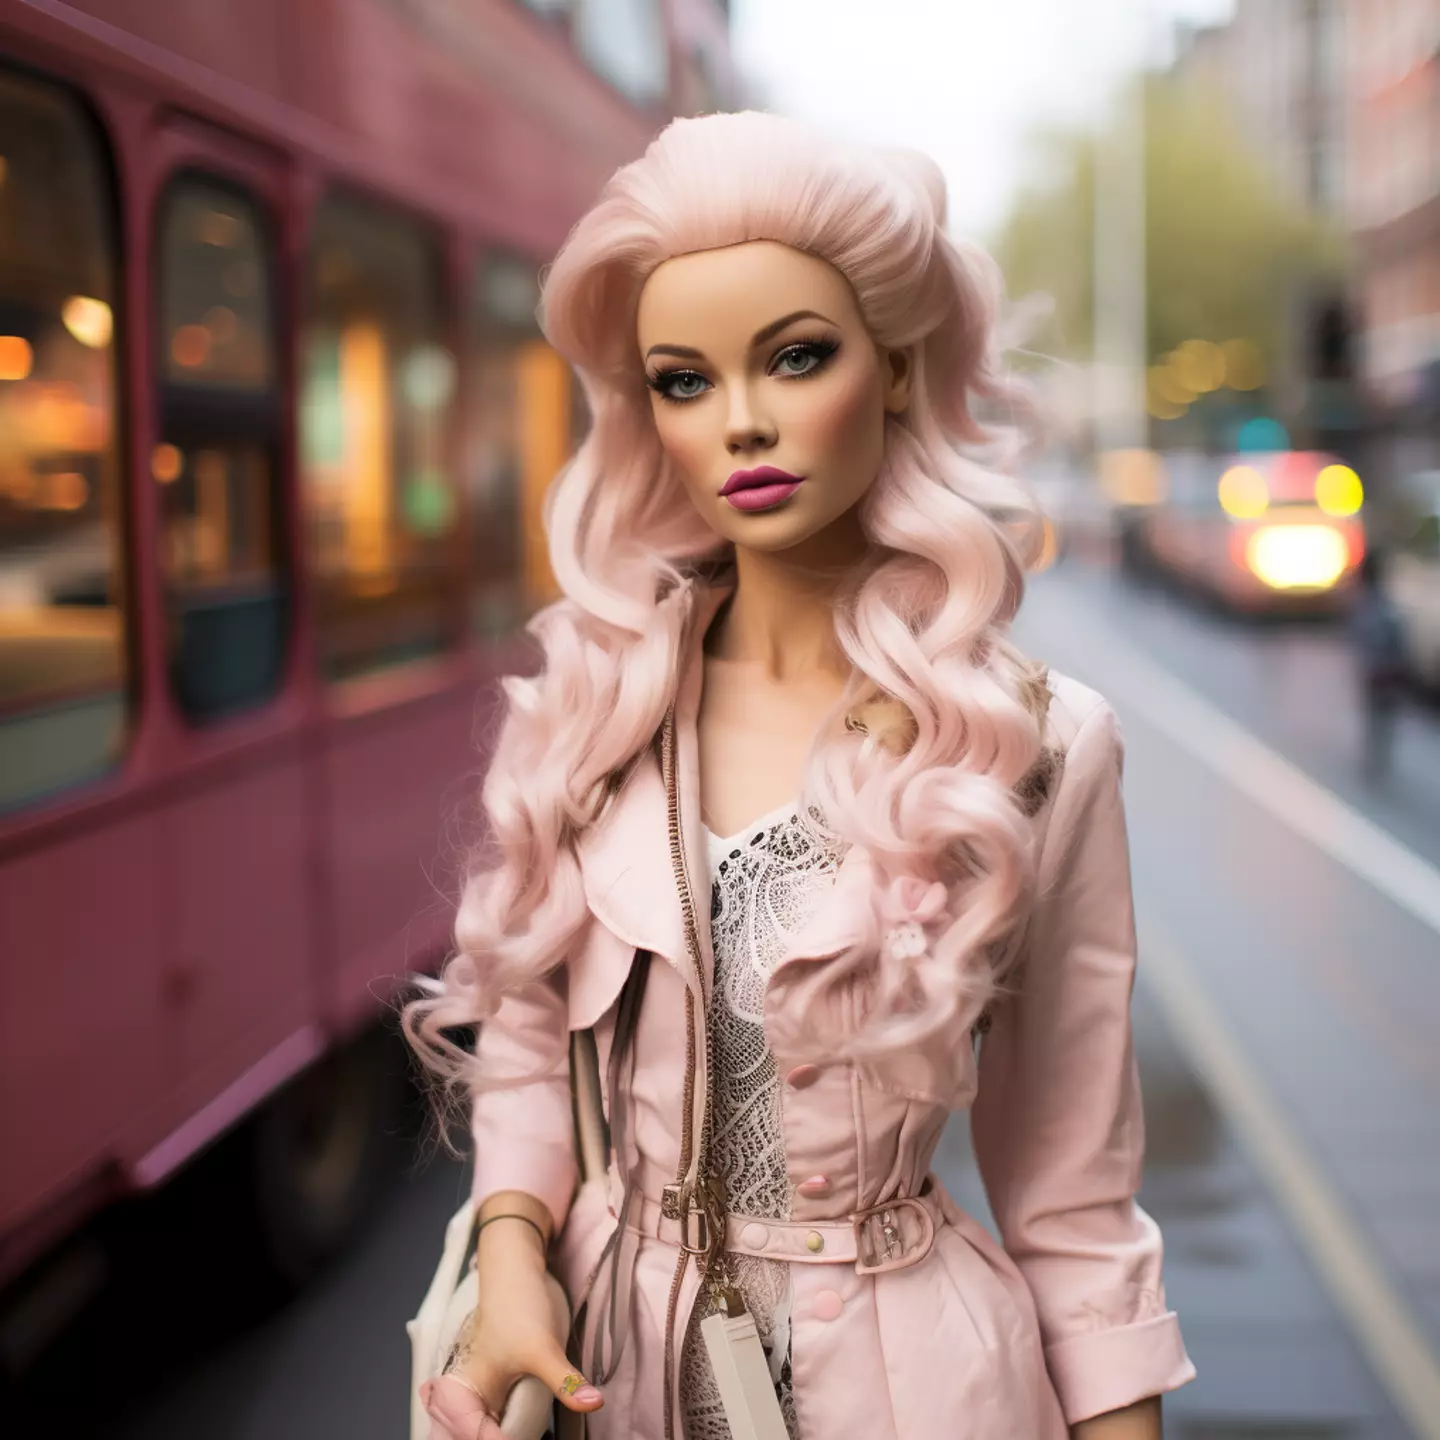 This Barbie is from London.